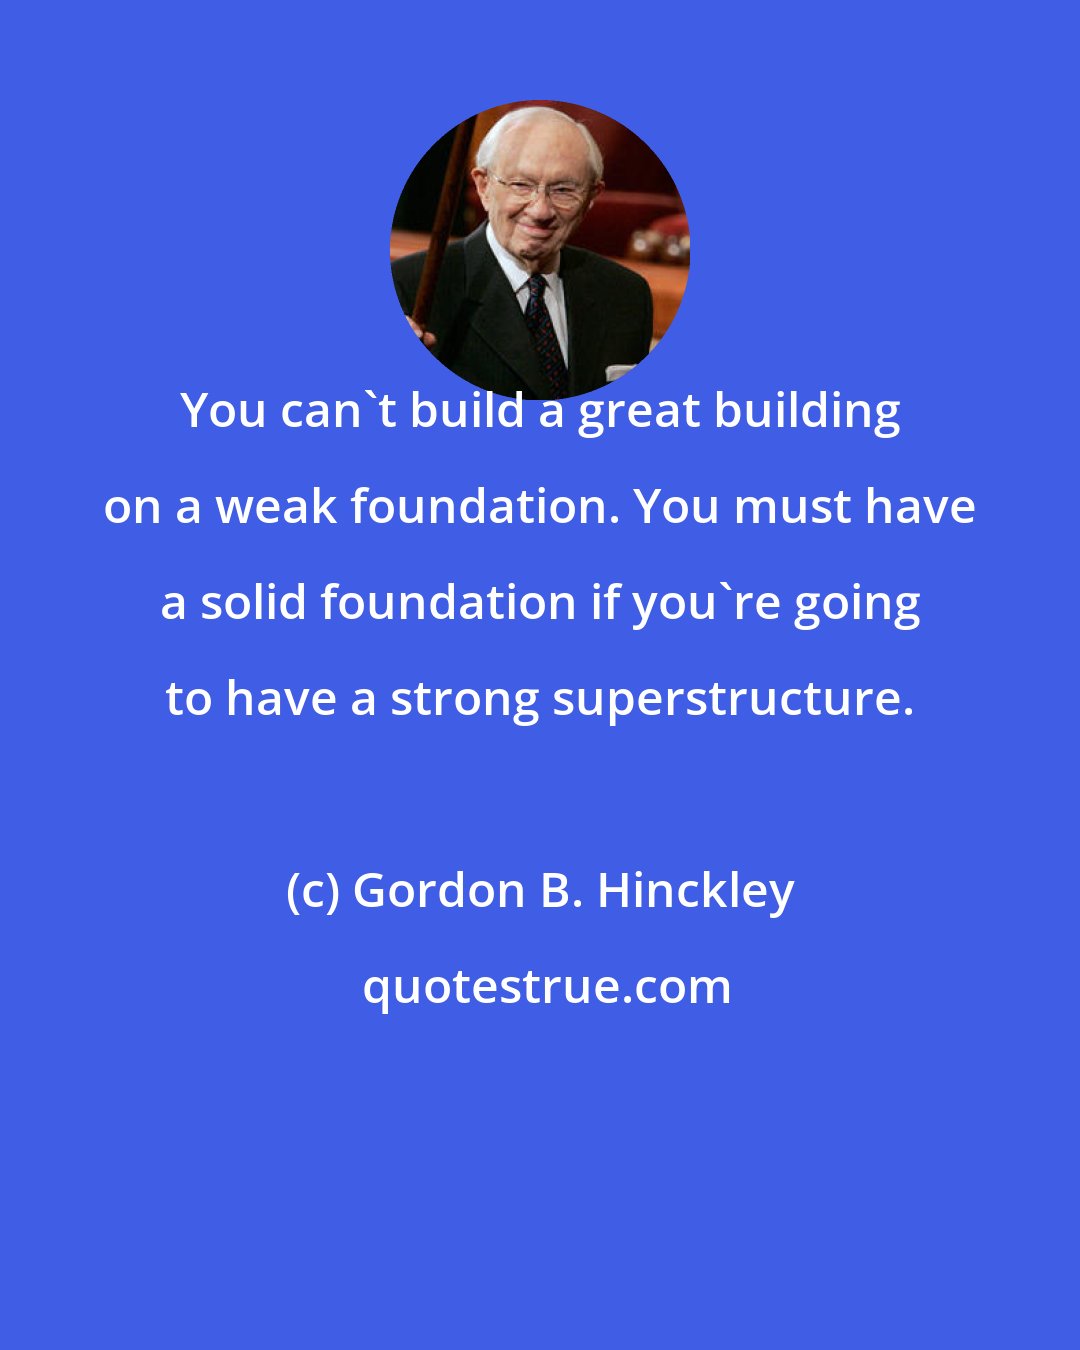 Gordon B. Hinckley: You can't build a great building on a weak foundation. You must have a solid foundation if you're going to have a strong superstructure.